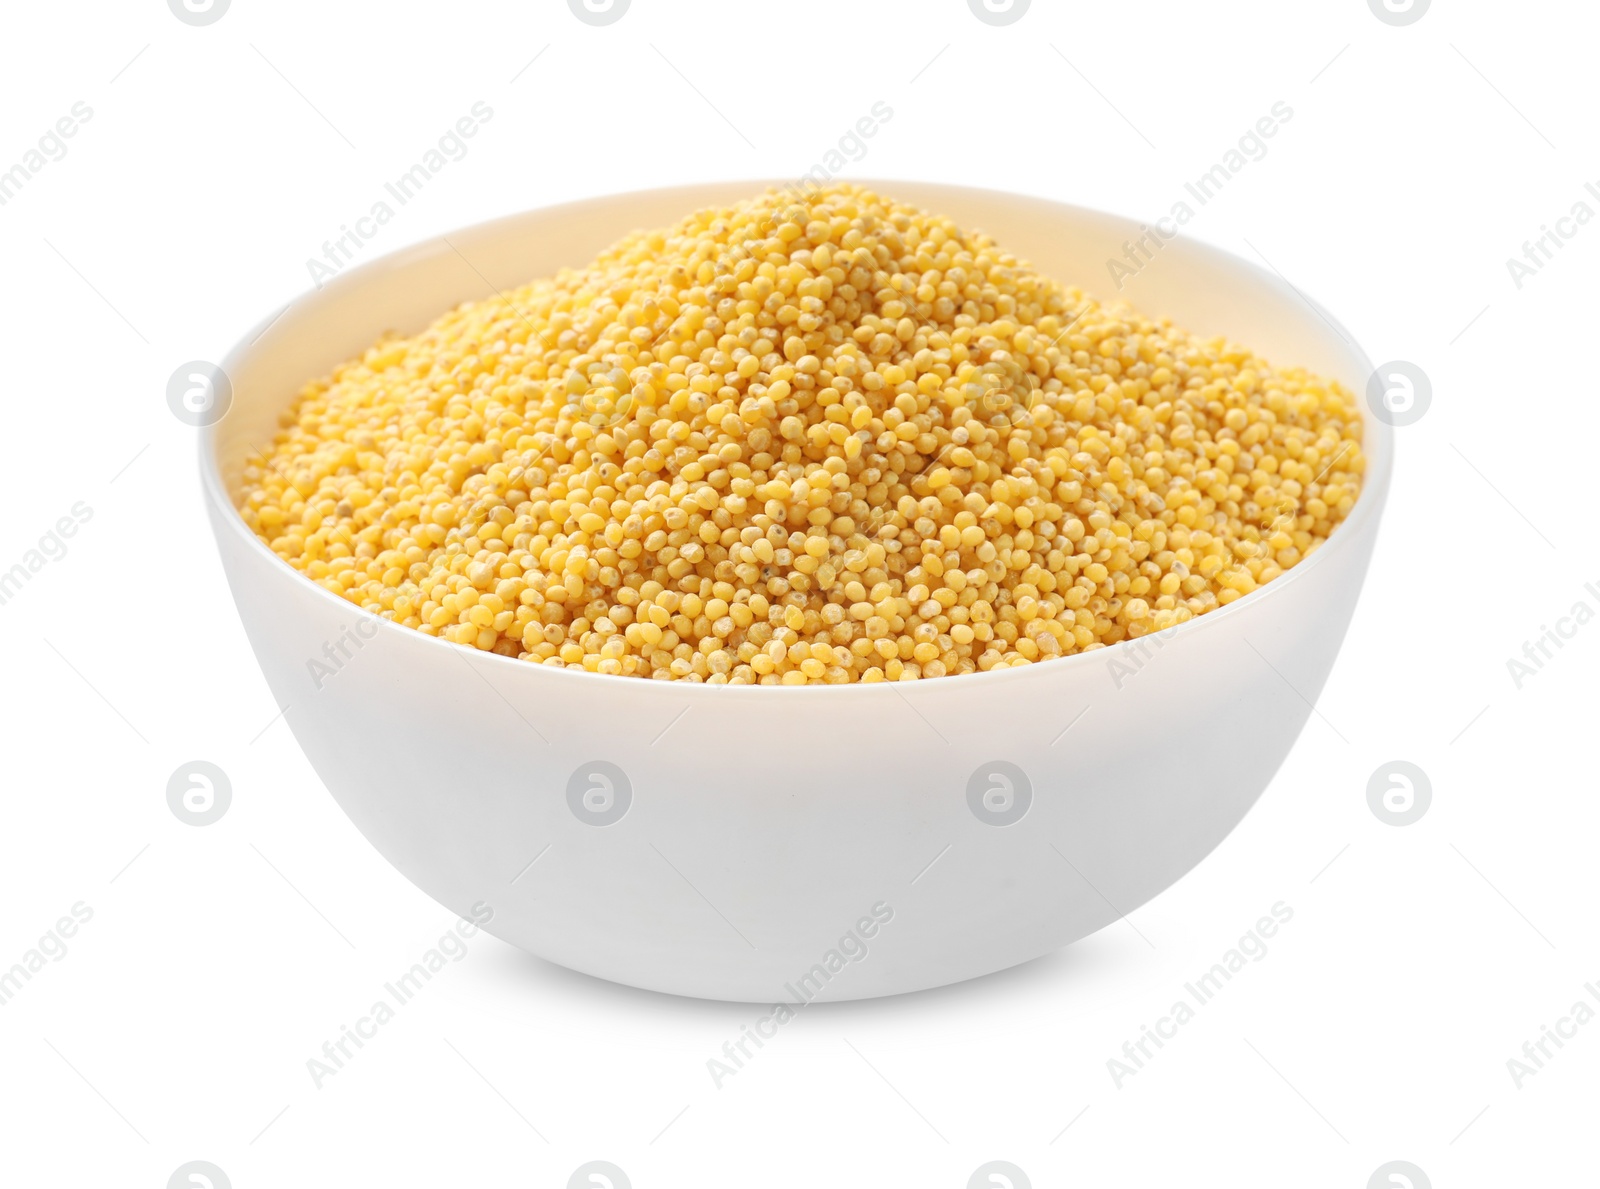 Photo of Dry millet seeds in bowl isolated on white